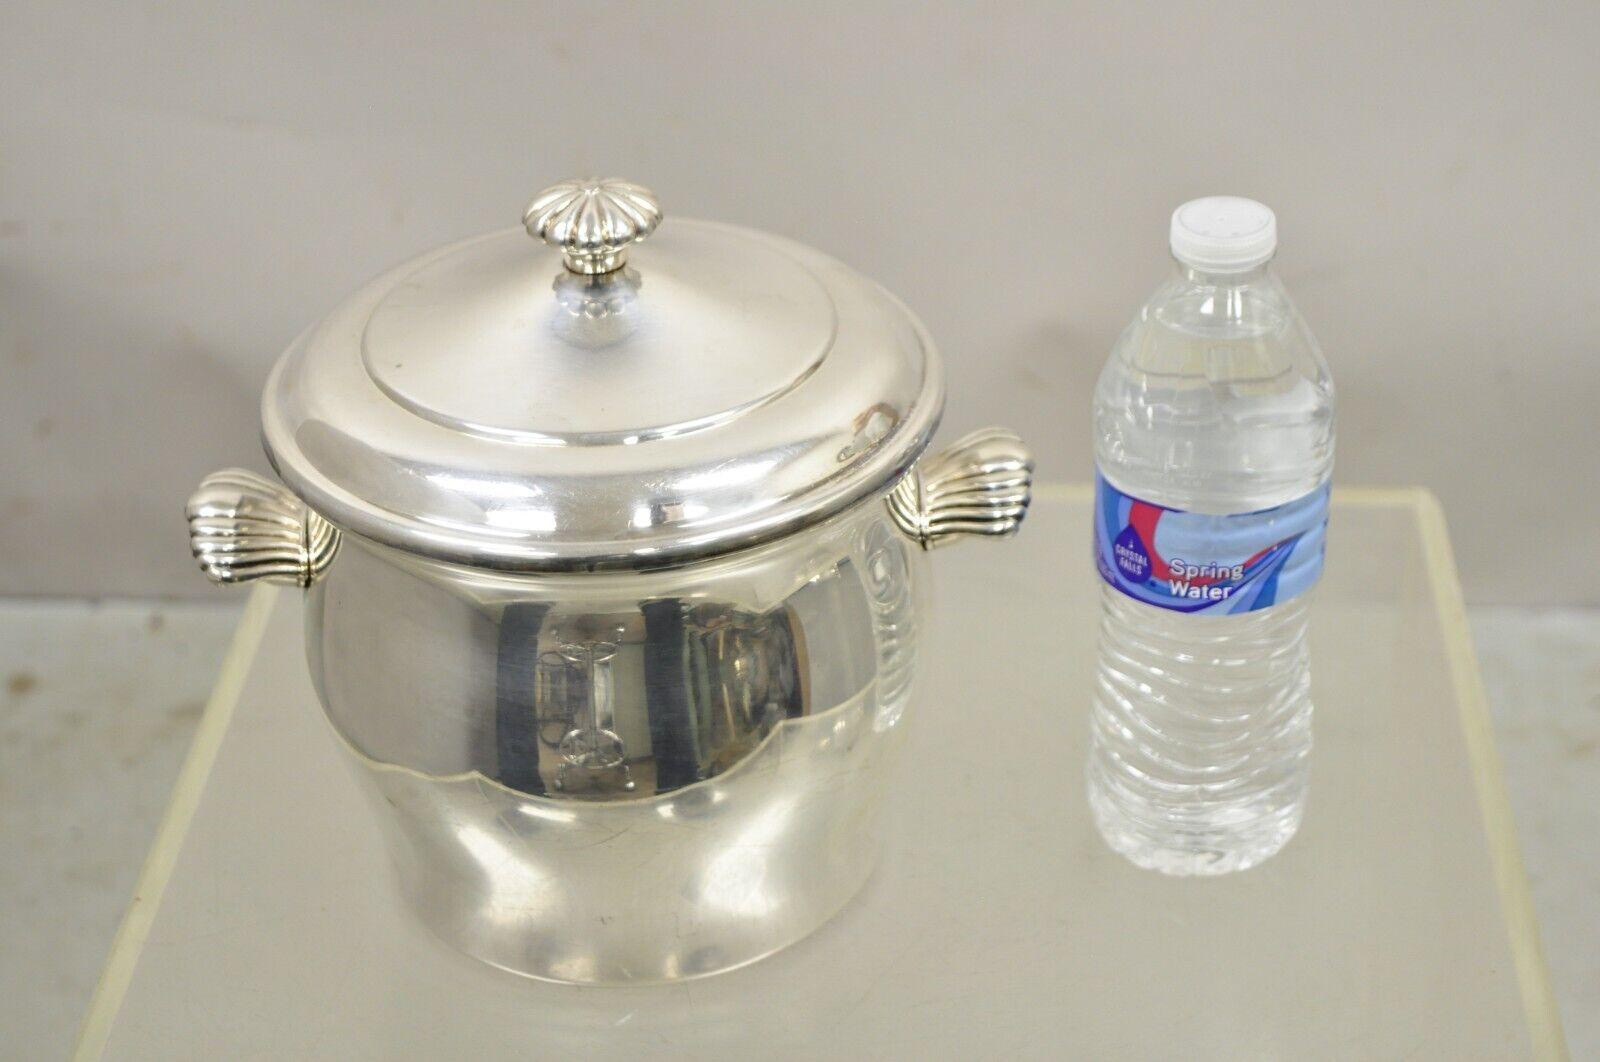 WM Rogers & Son Paul Revere 3027 Silver Plate Lidded Ice Bucket. Item features Leafy twin handles, glass liner, clean modernest lines, original hallmark. Circa Mid 20th Century. Measurements:  8